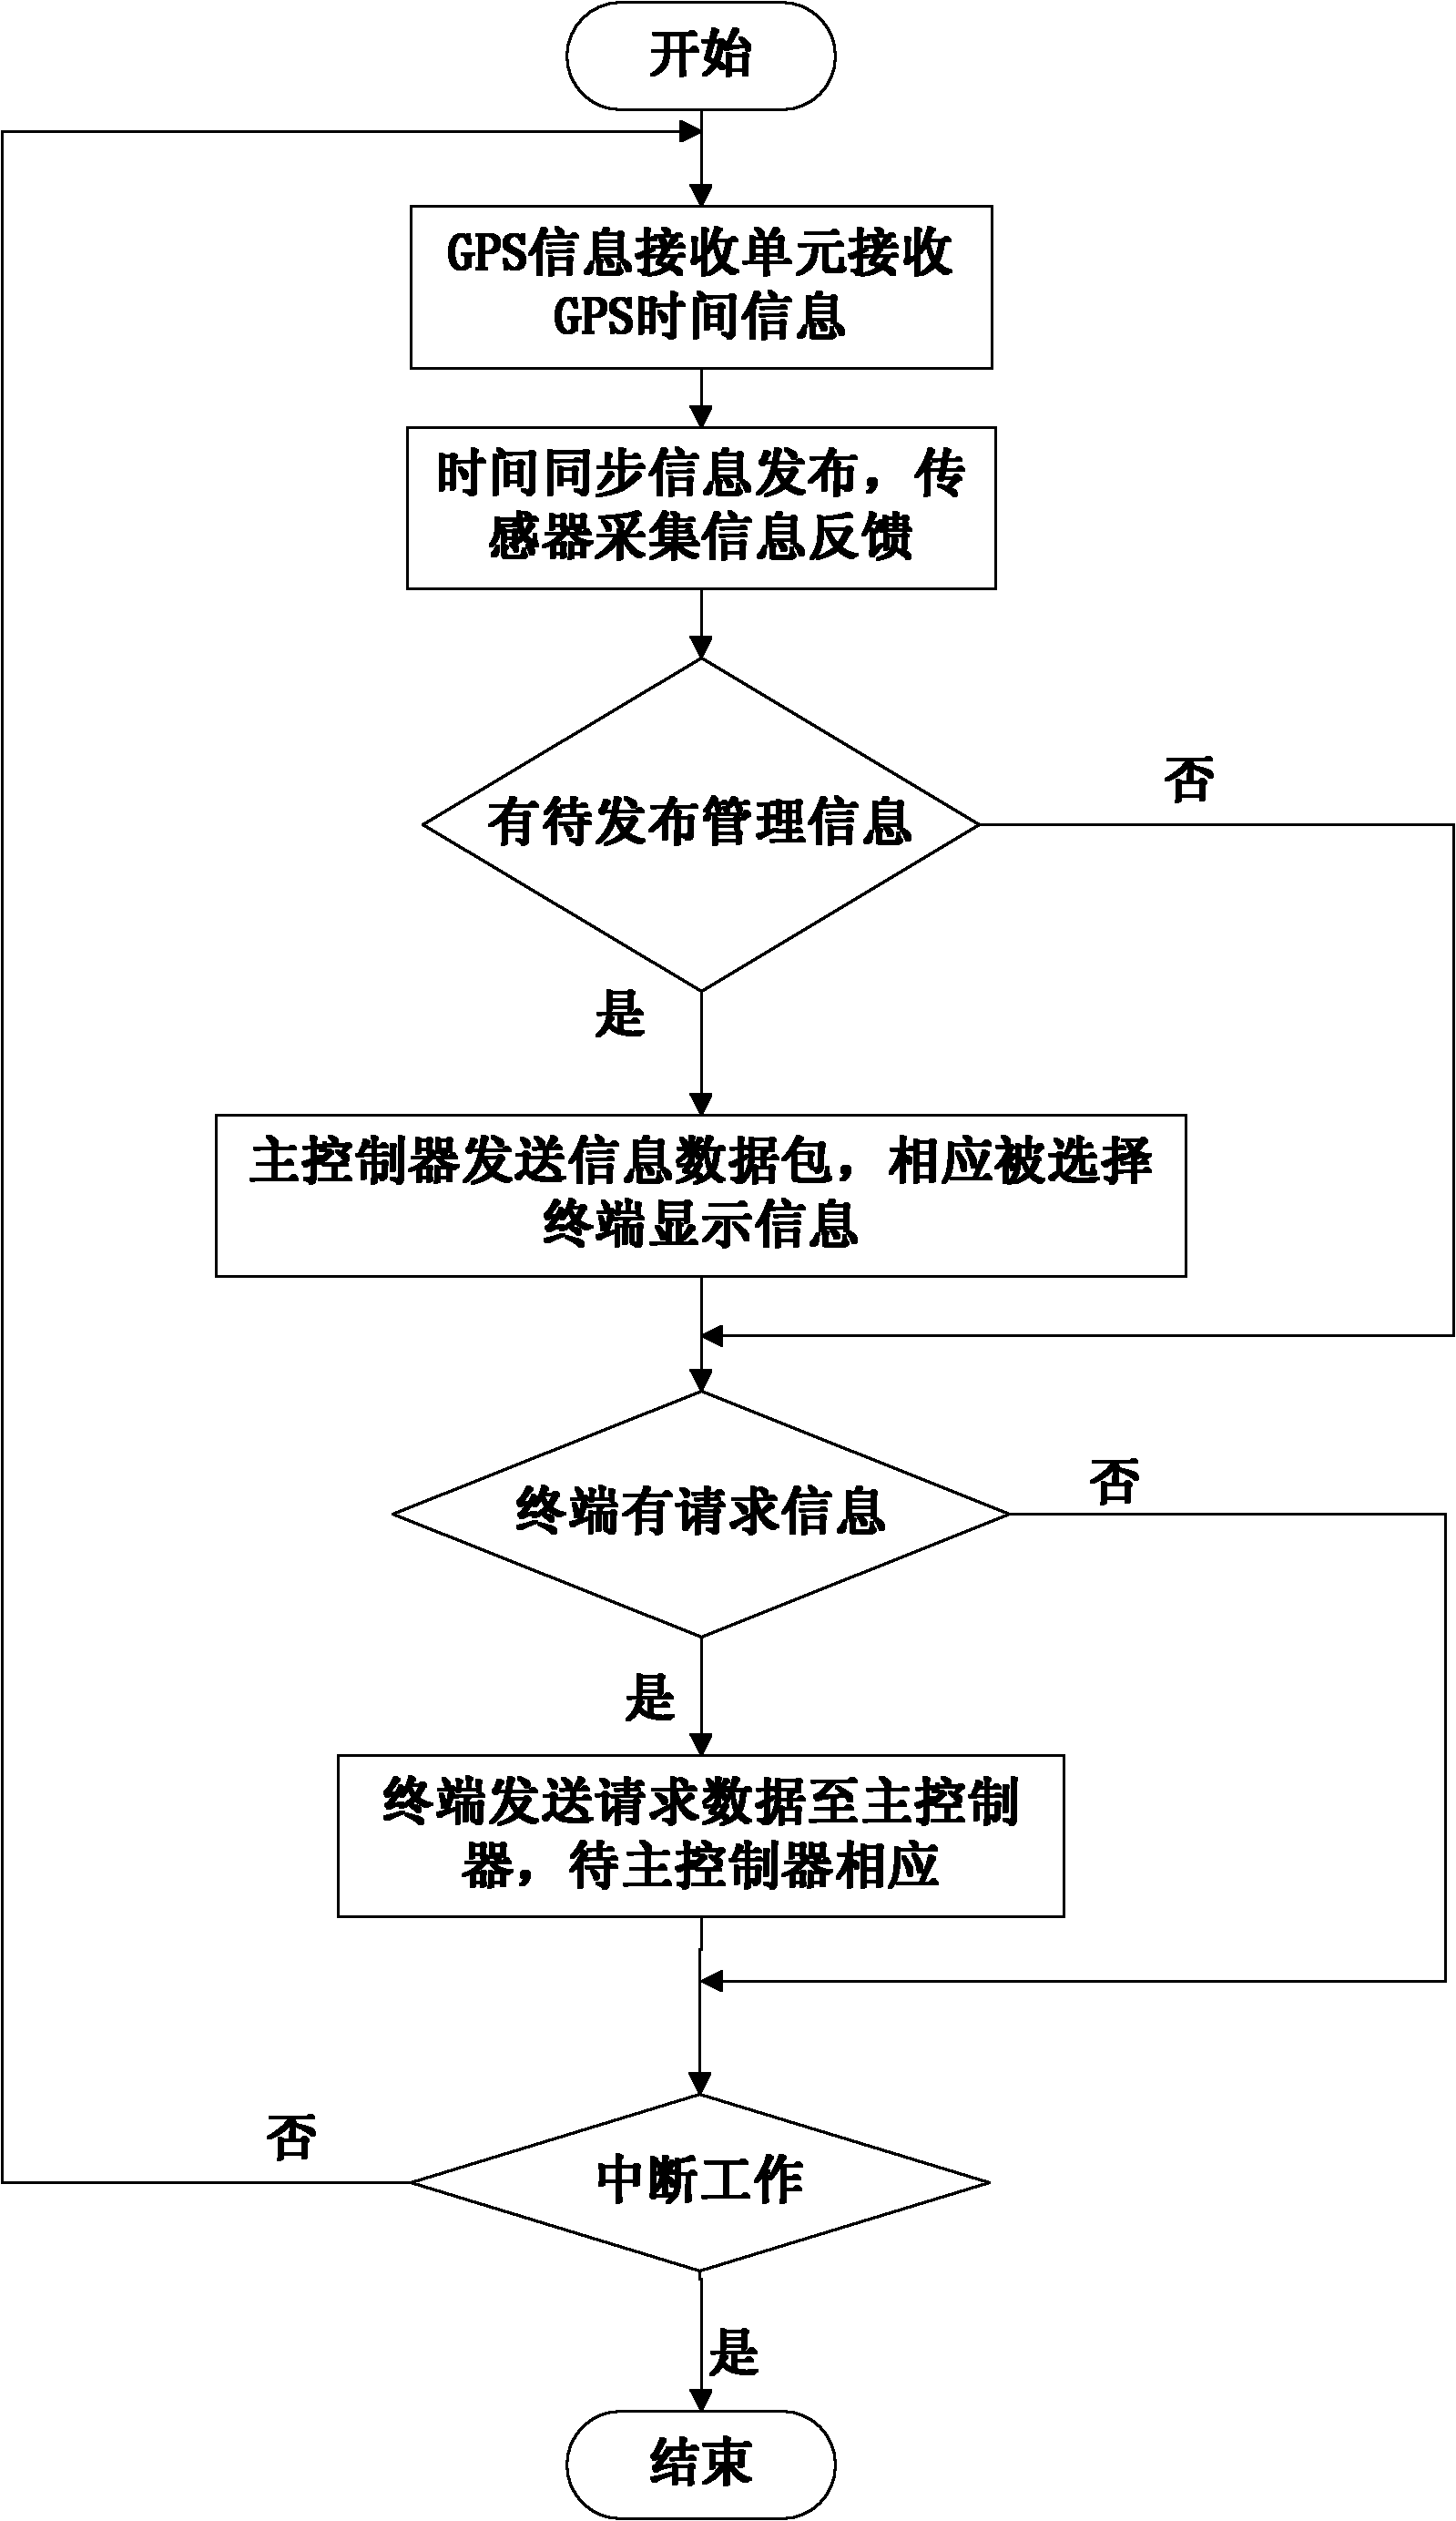 Device and method for publishing wireless sensor network information based on global navigation satellite system/network time protocol (GNSS/NTP)